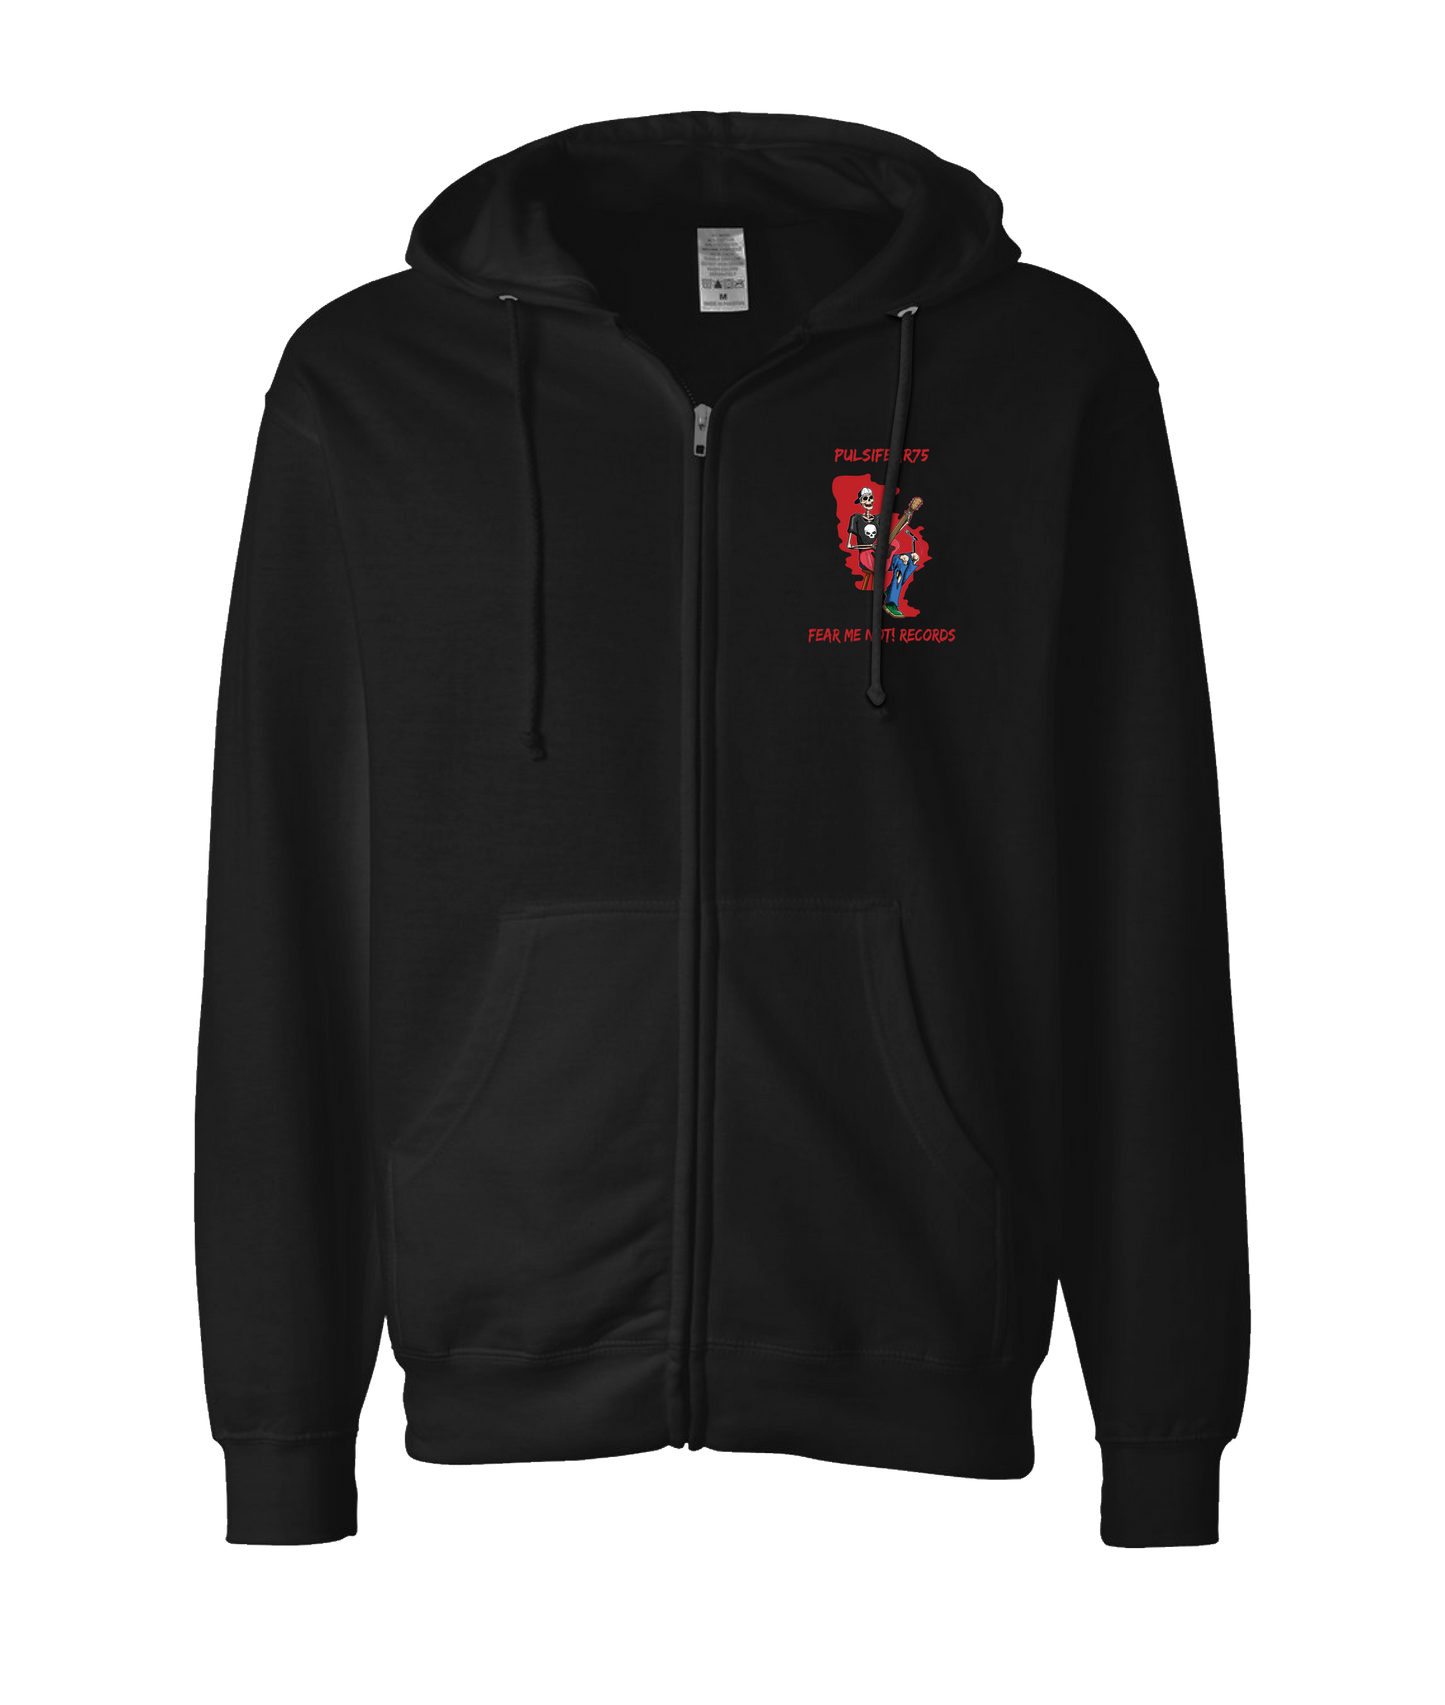 Mark Pulsipher Official - Fear Me Not! Records - Black Zip Hoodie